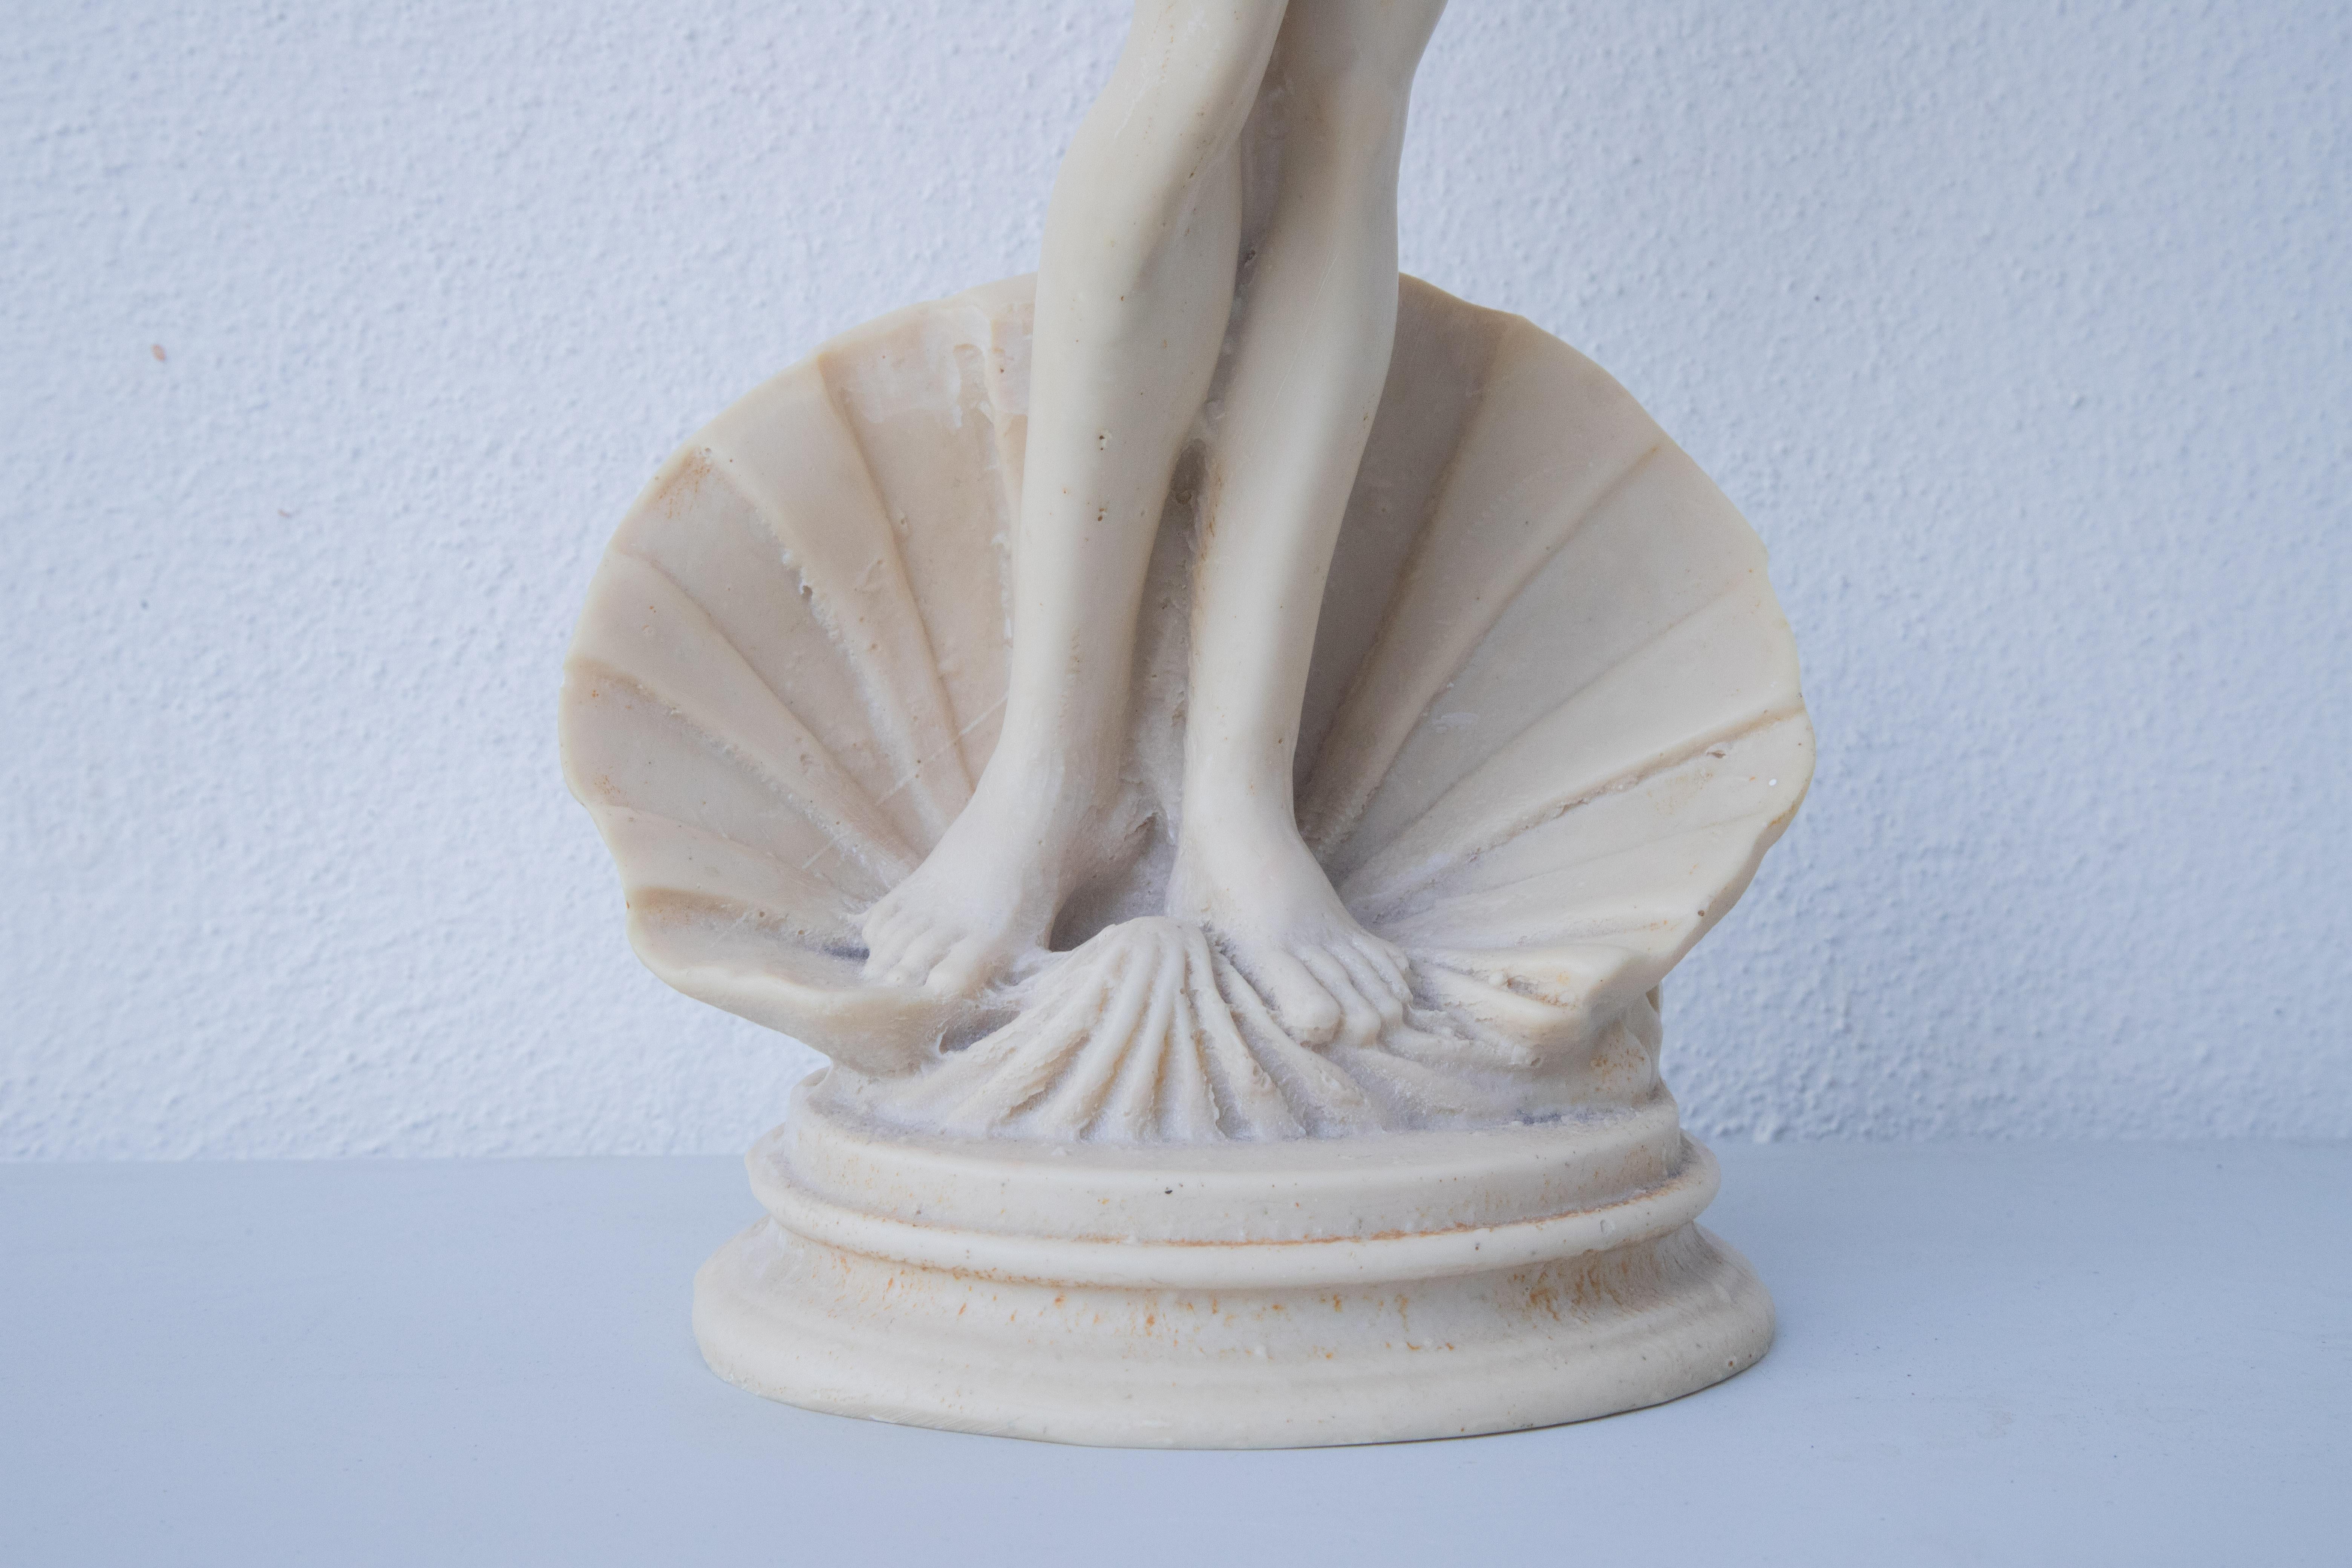 Vintage sculpture The Birth of Venus.
Woman with flowing hair, Italy 70s.
Sculpture Made of Marble Powder and Resin.
This sculpture is from around the 1960s.
The intricate sculpture of the 